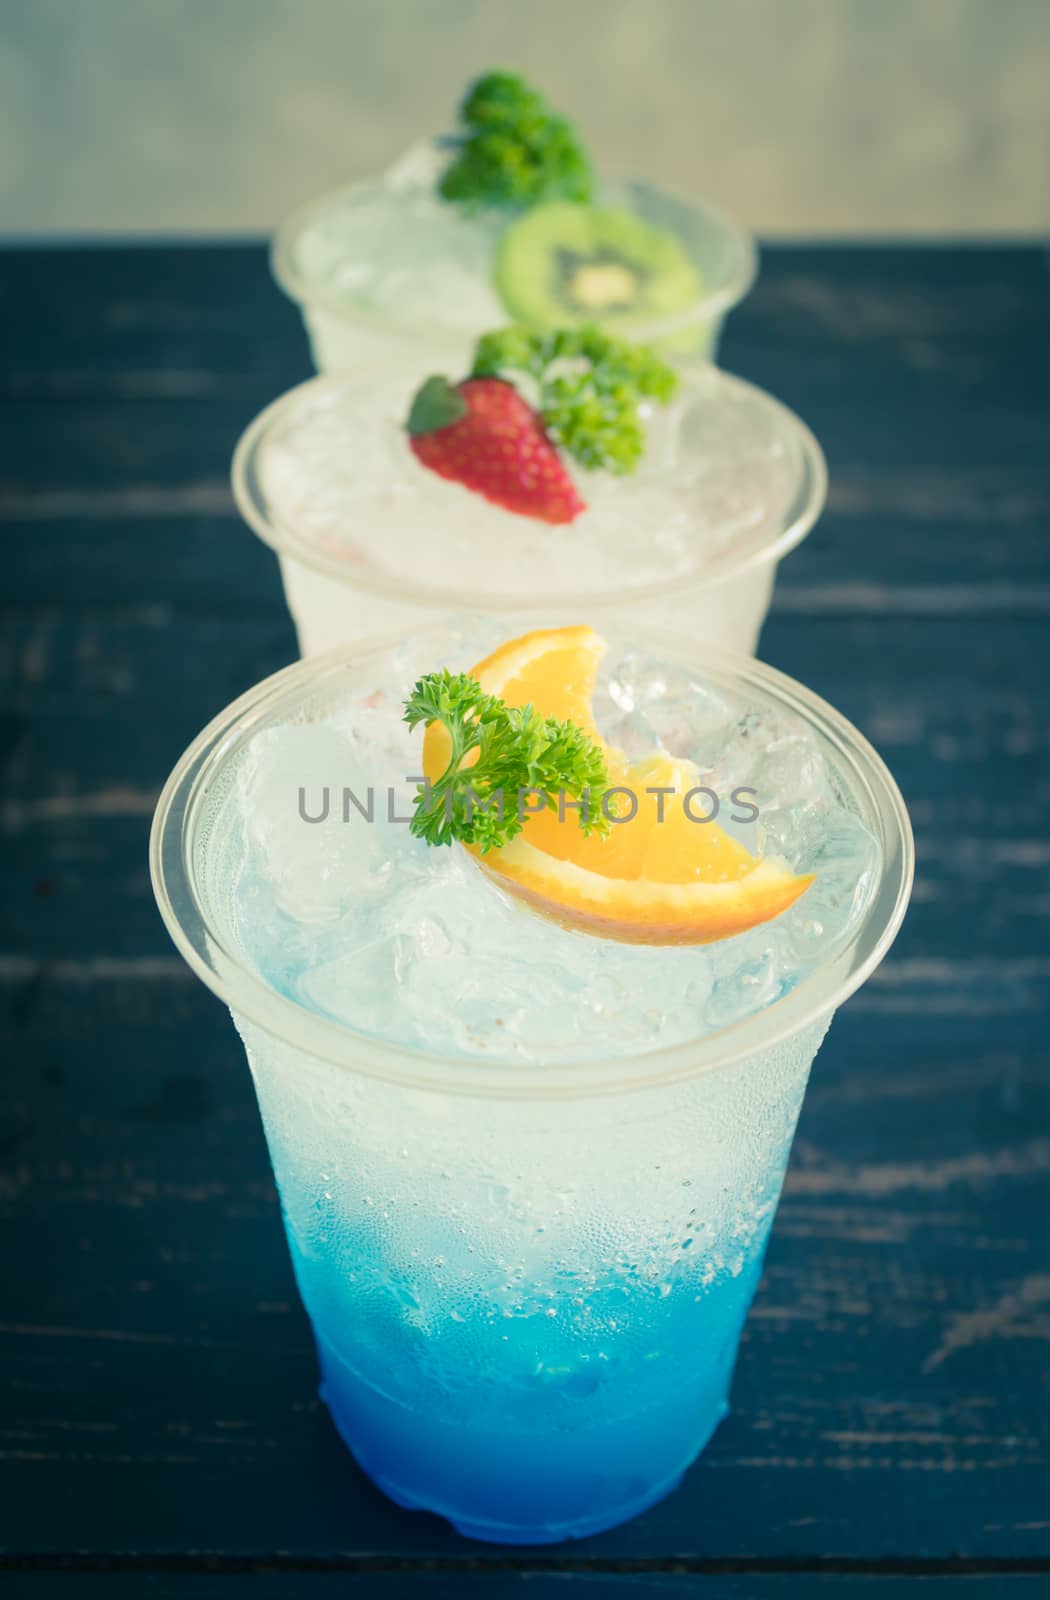 Blue Red Green Italian Soda Cold Beverage and Lemon Strawberry K by steafpong